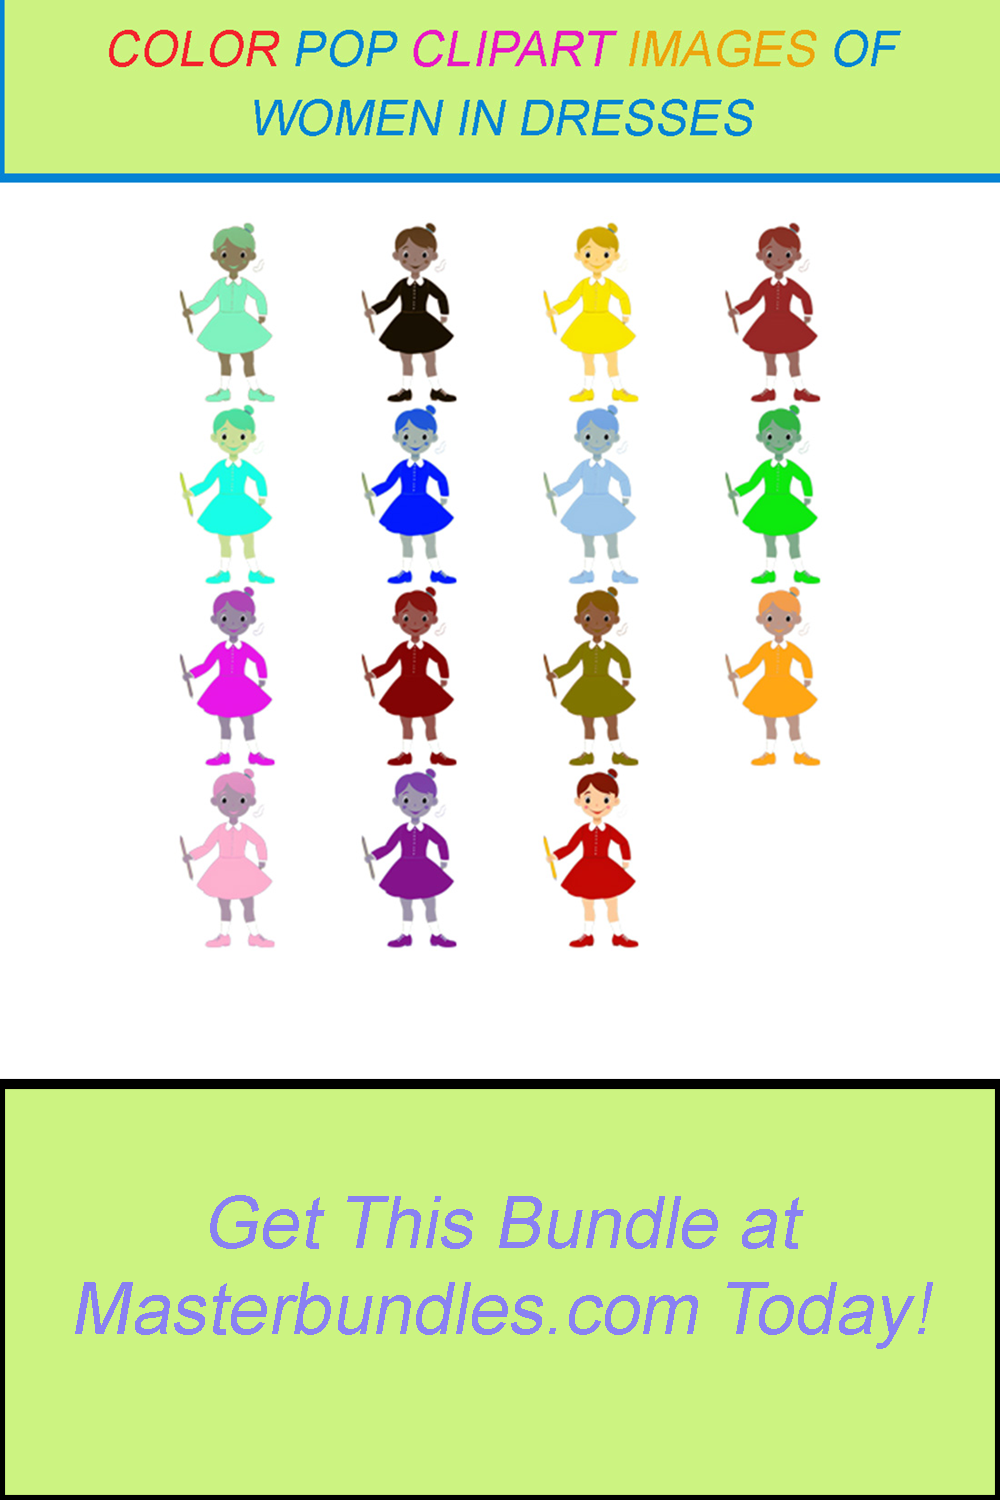 15 COLOR POP CLIPART IMAGES OF WOMEN IN DRESSES pinterest preview image.